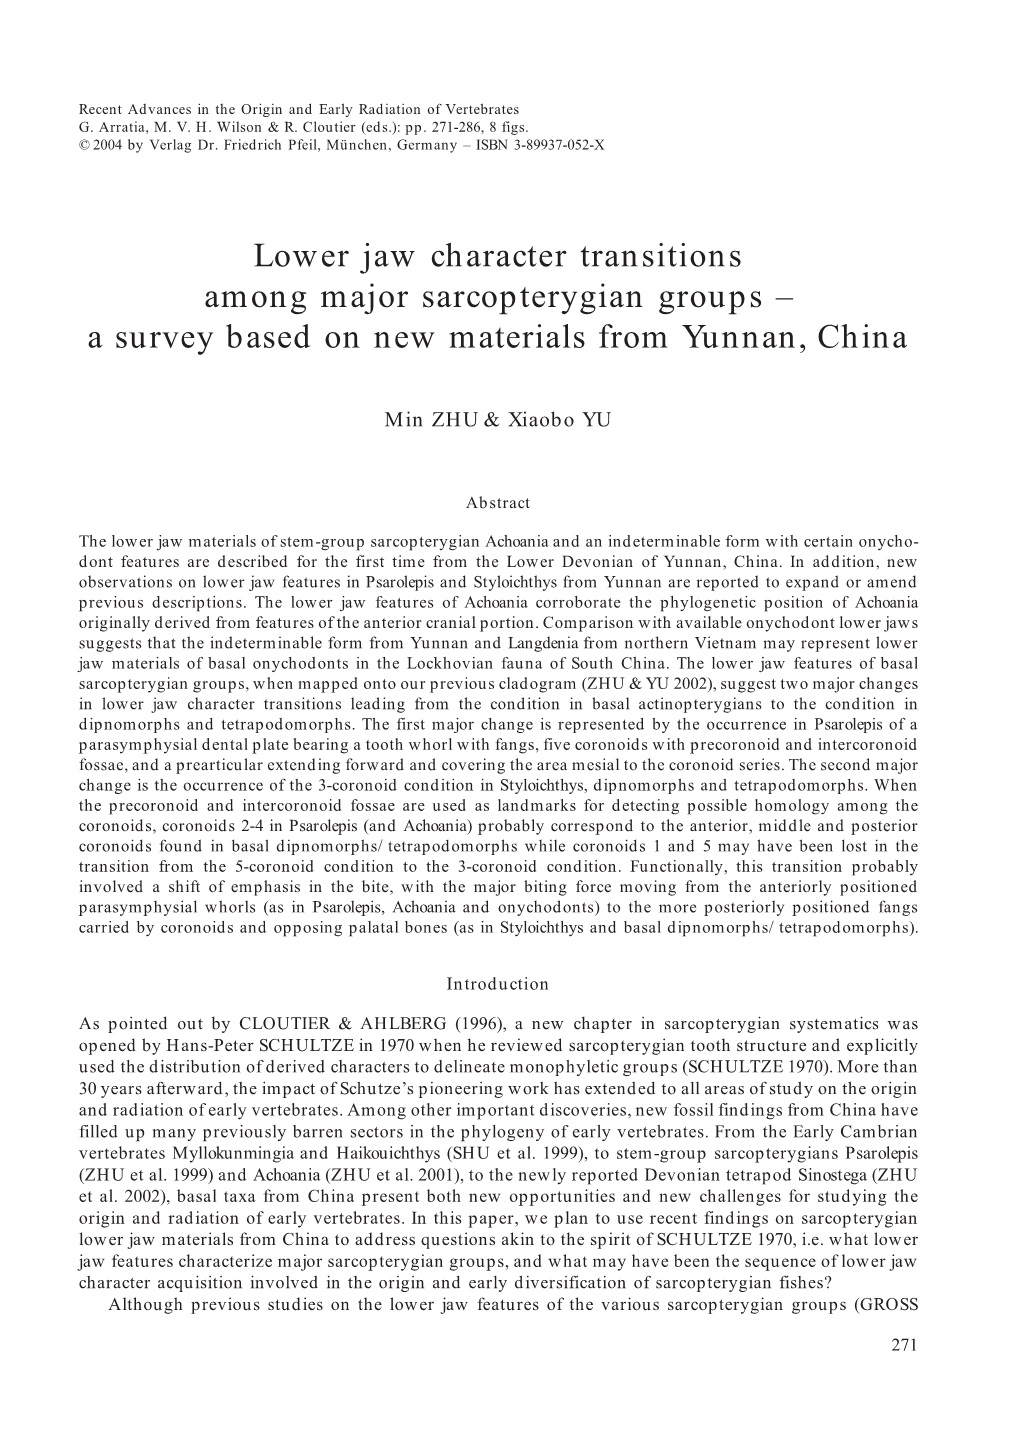 Lower Jaw Character Transitions Among Major Sarcopterygian Groups – a Survey Based on New Materials from Yunnan, China